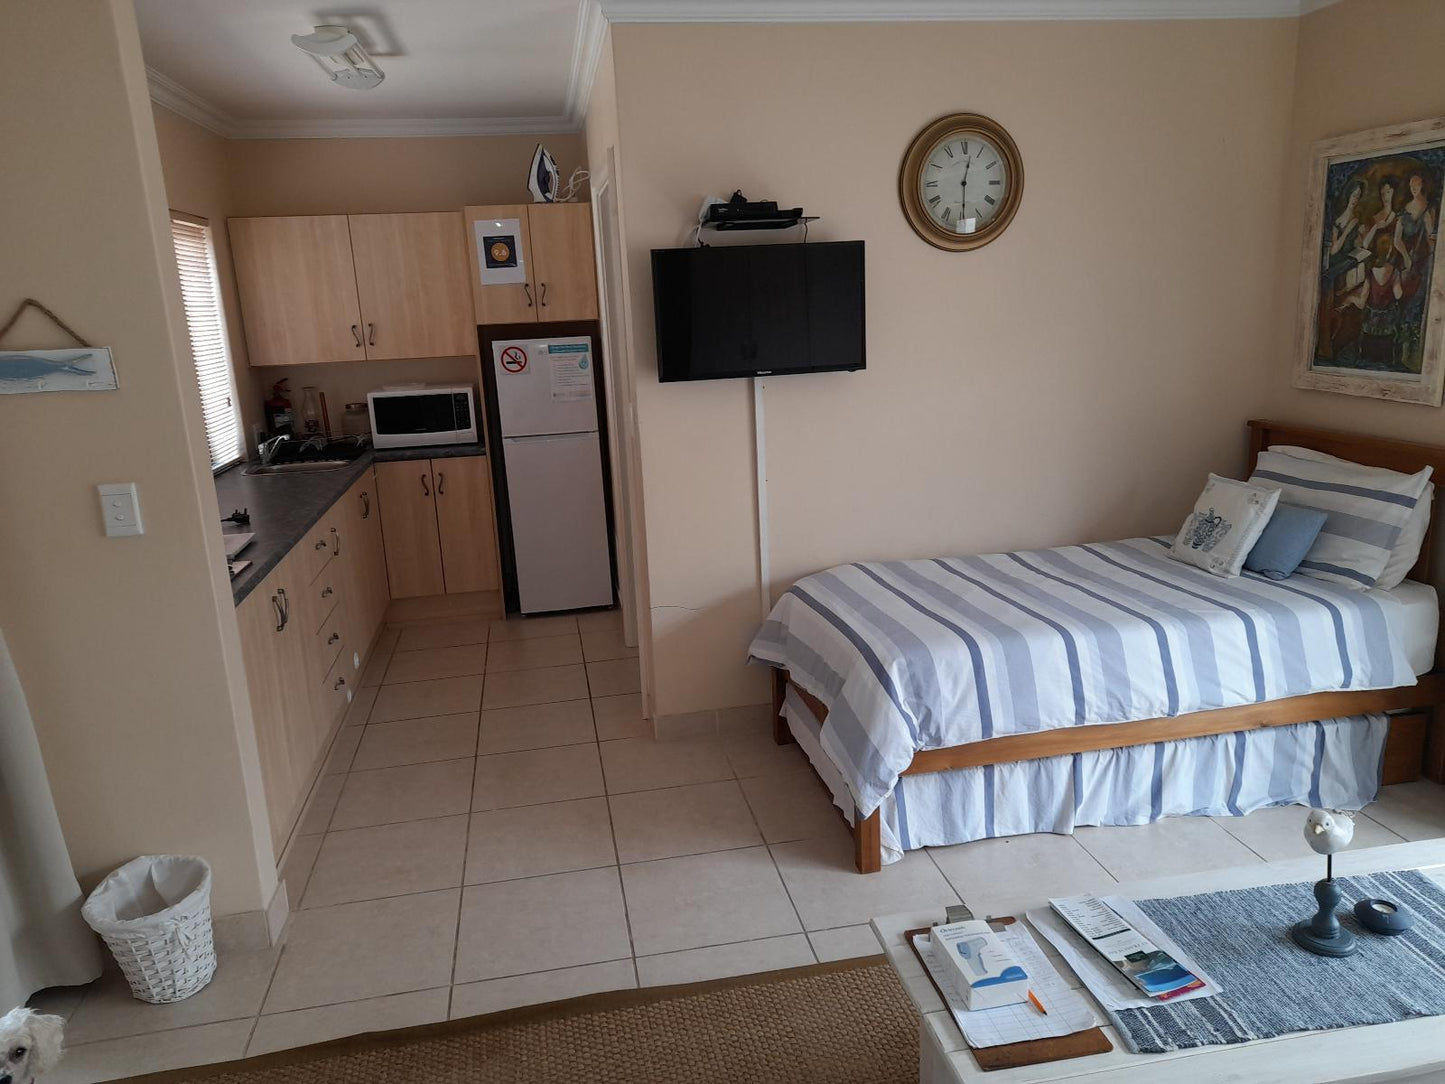 Captains Cabin @ Barnard Self-Catering Apartments